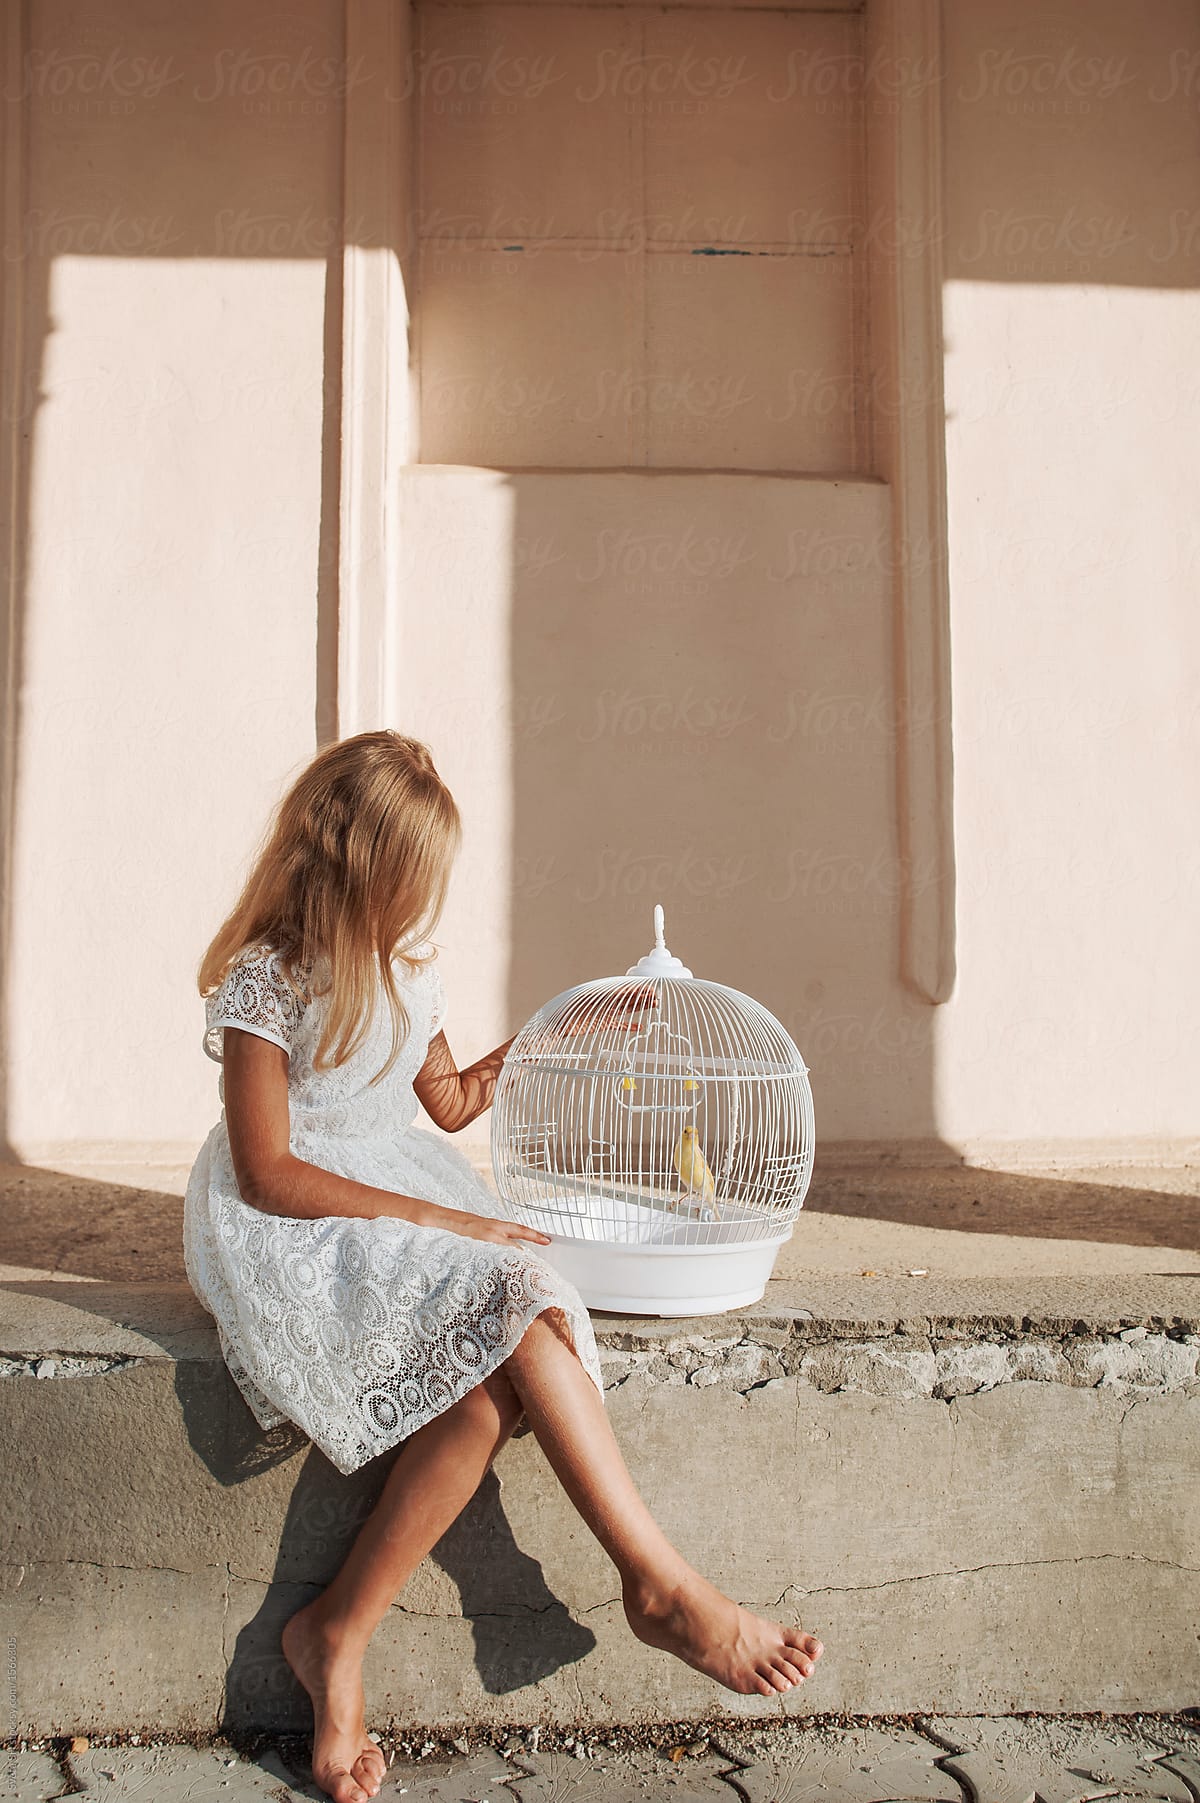 Girl with a cage for birds